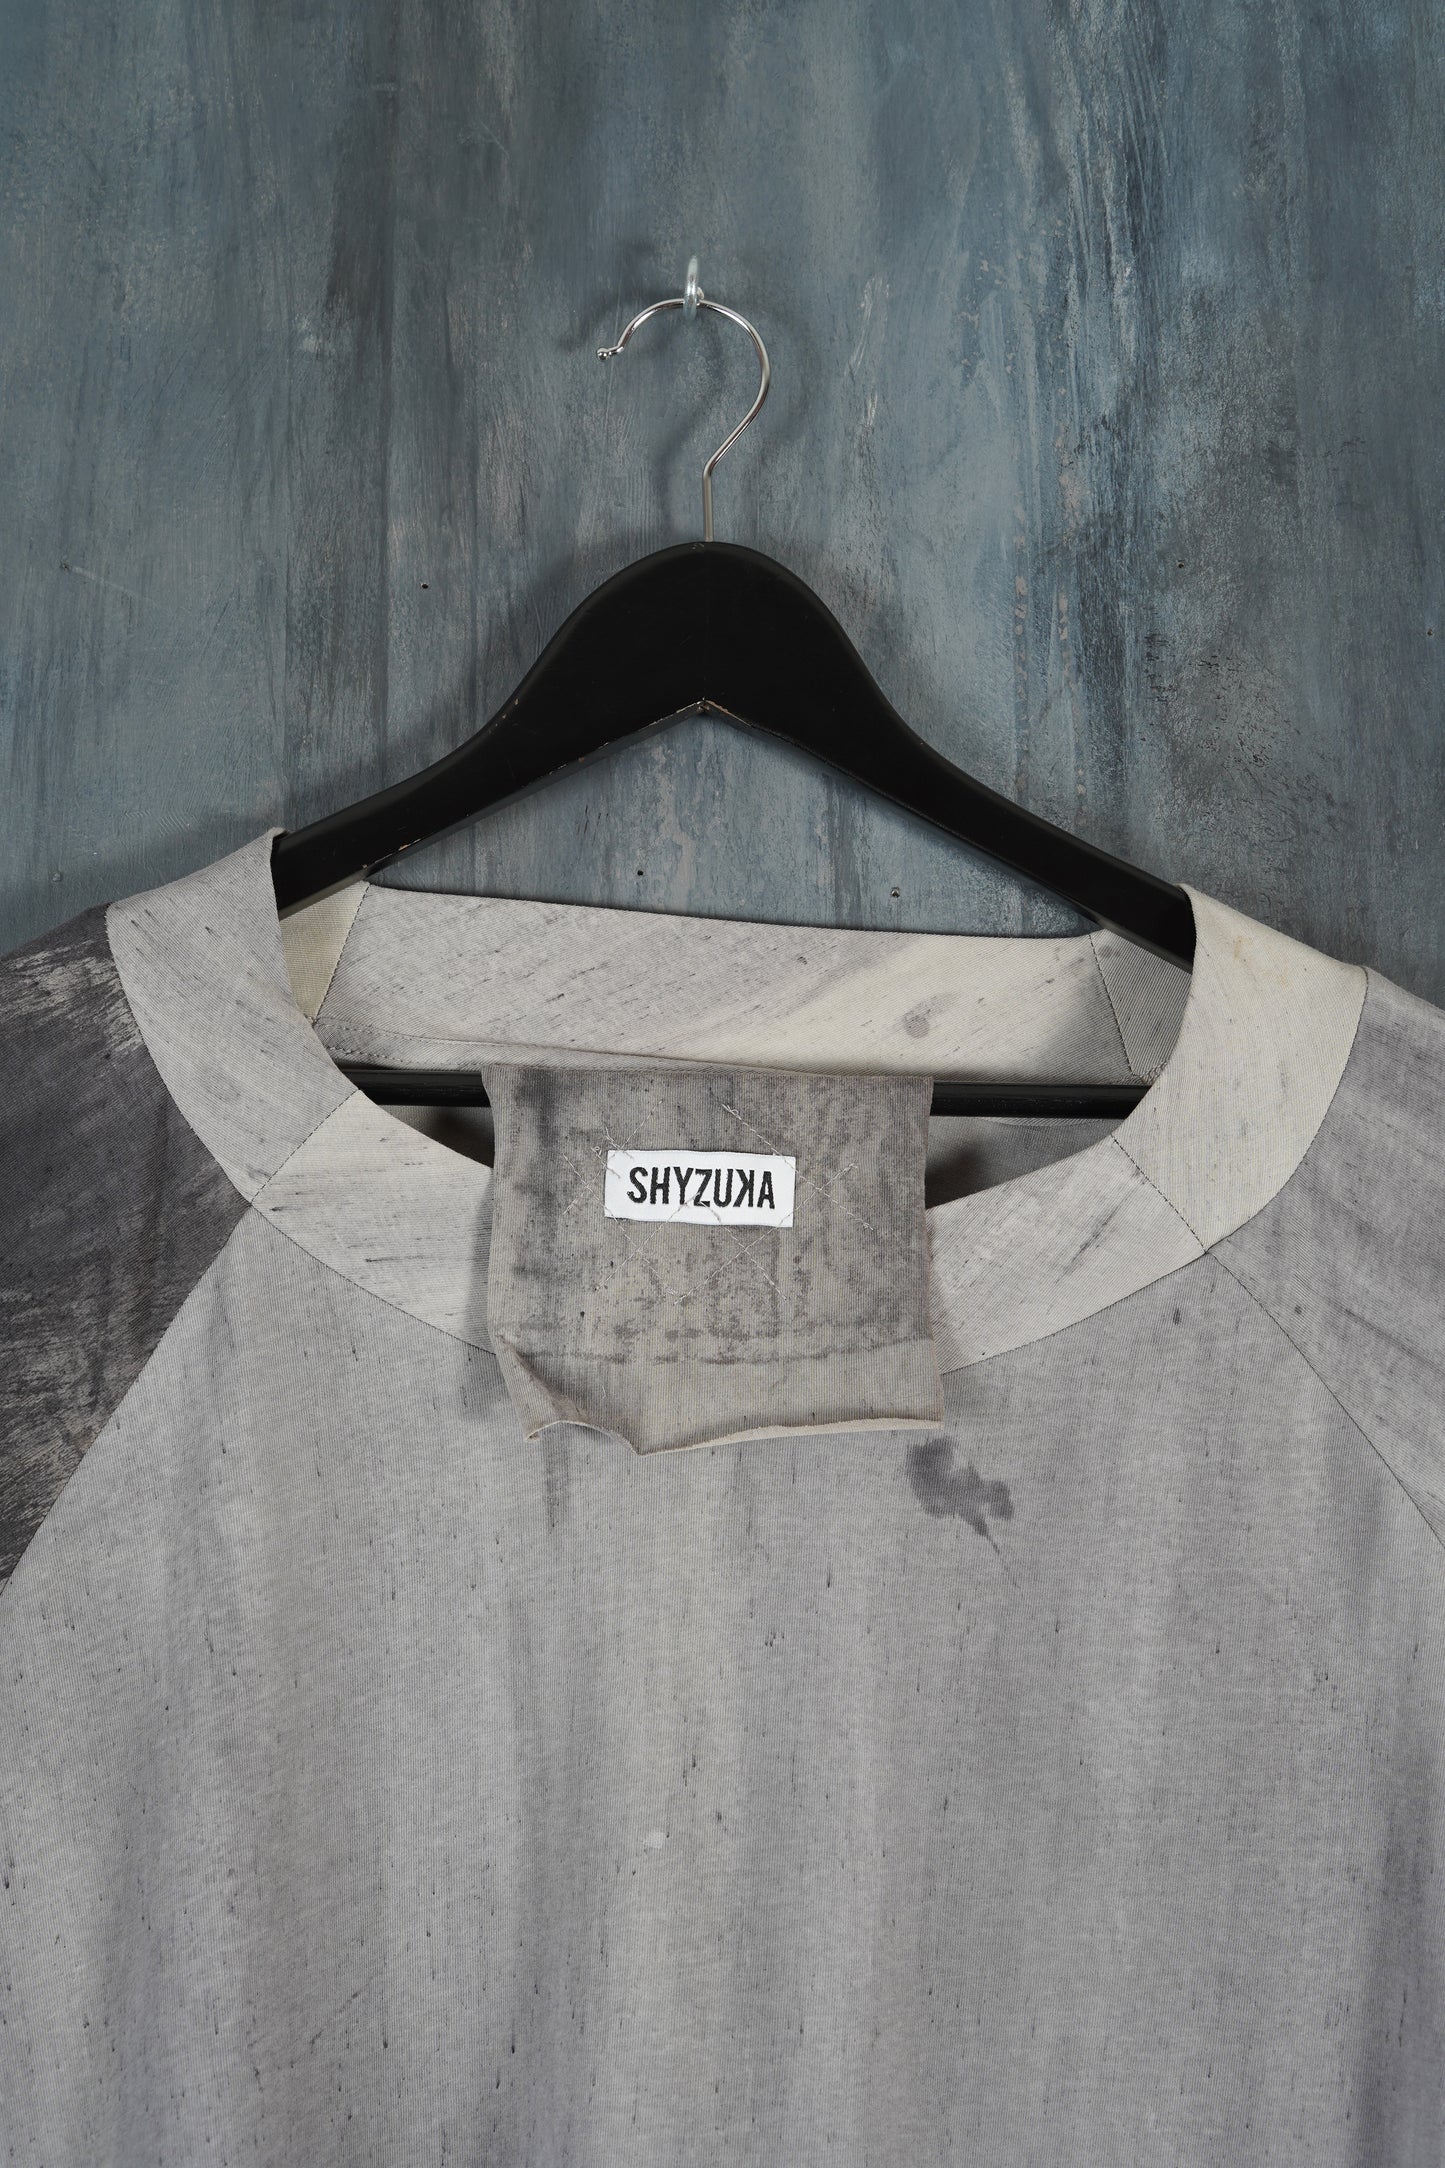 Natural Dyed T-shirt L #89